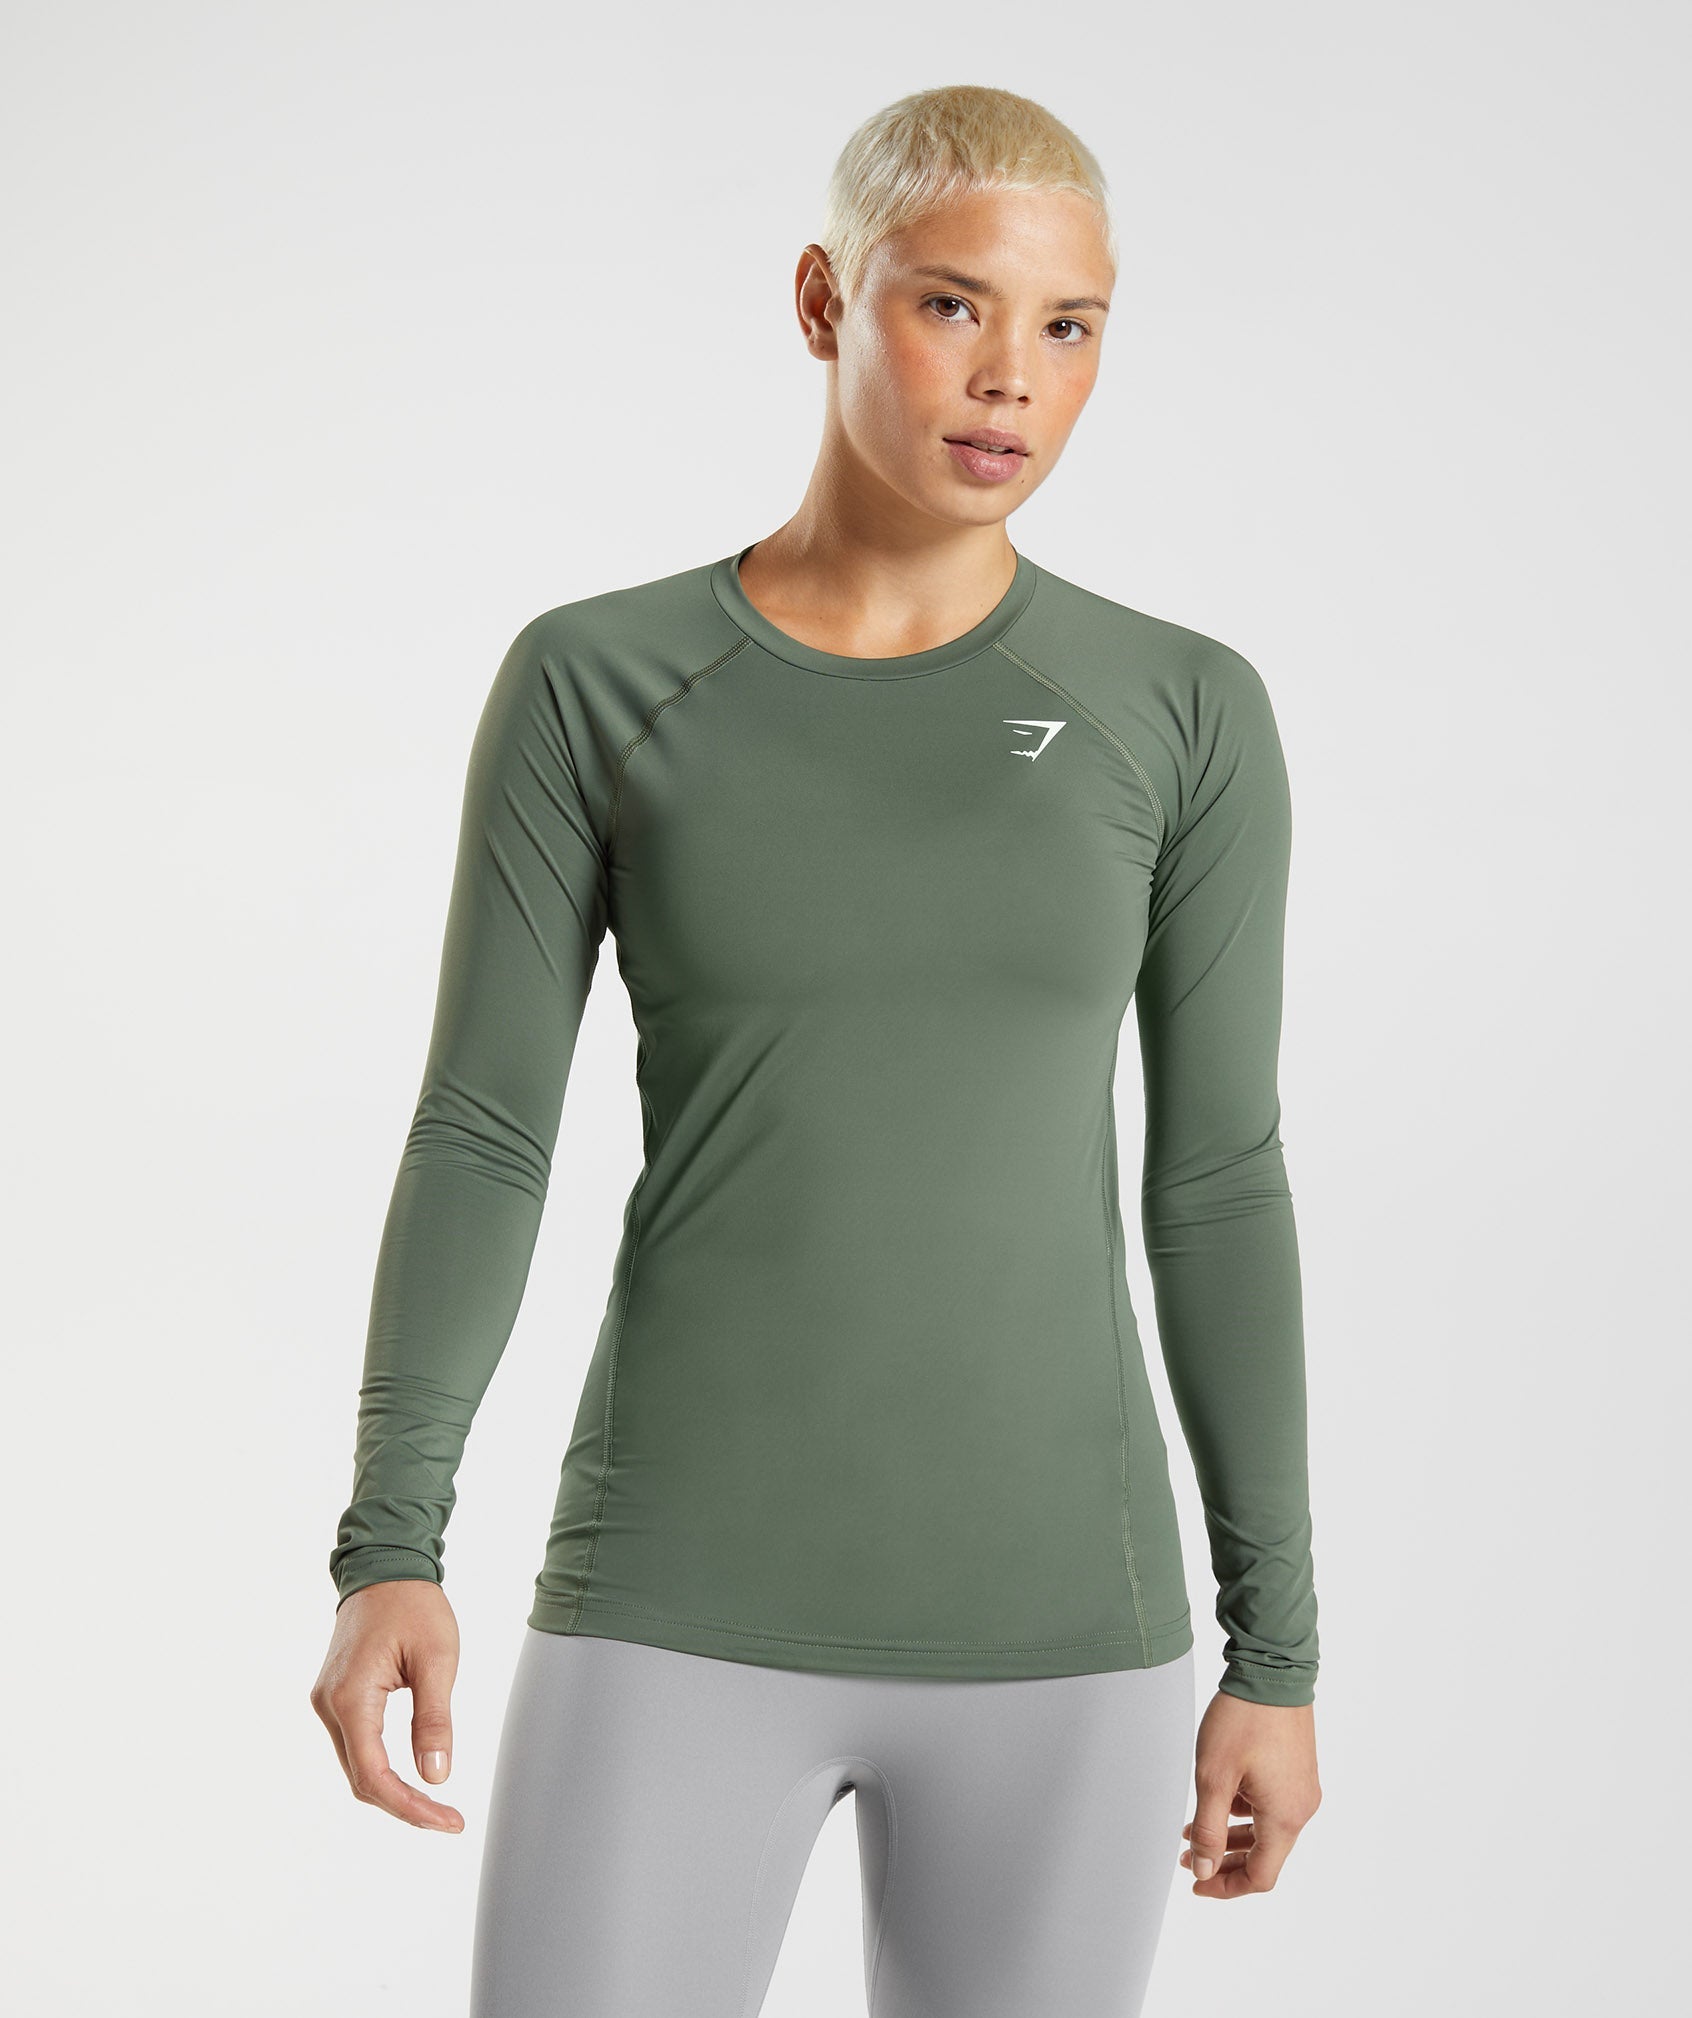 Training Baselayer Long Sleeve Top in Core Olive